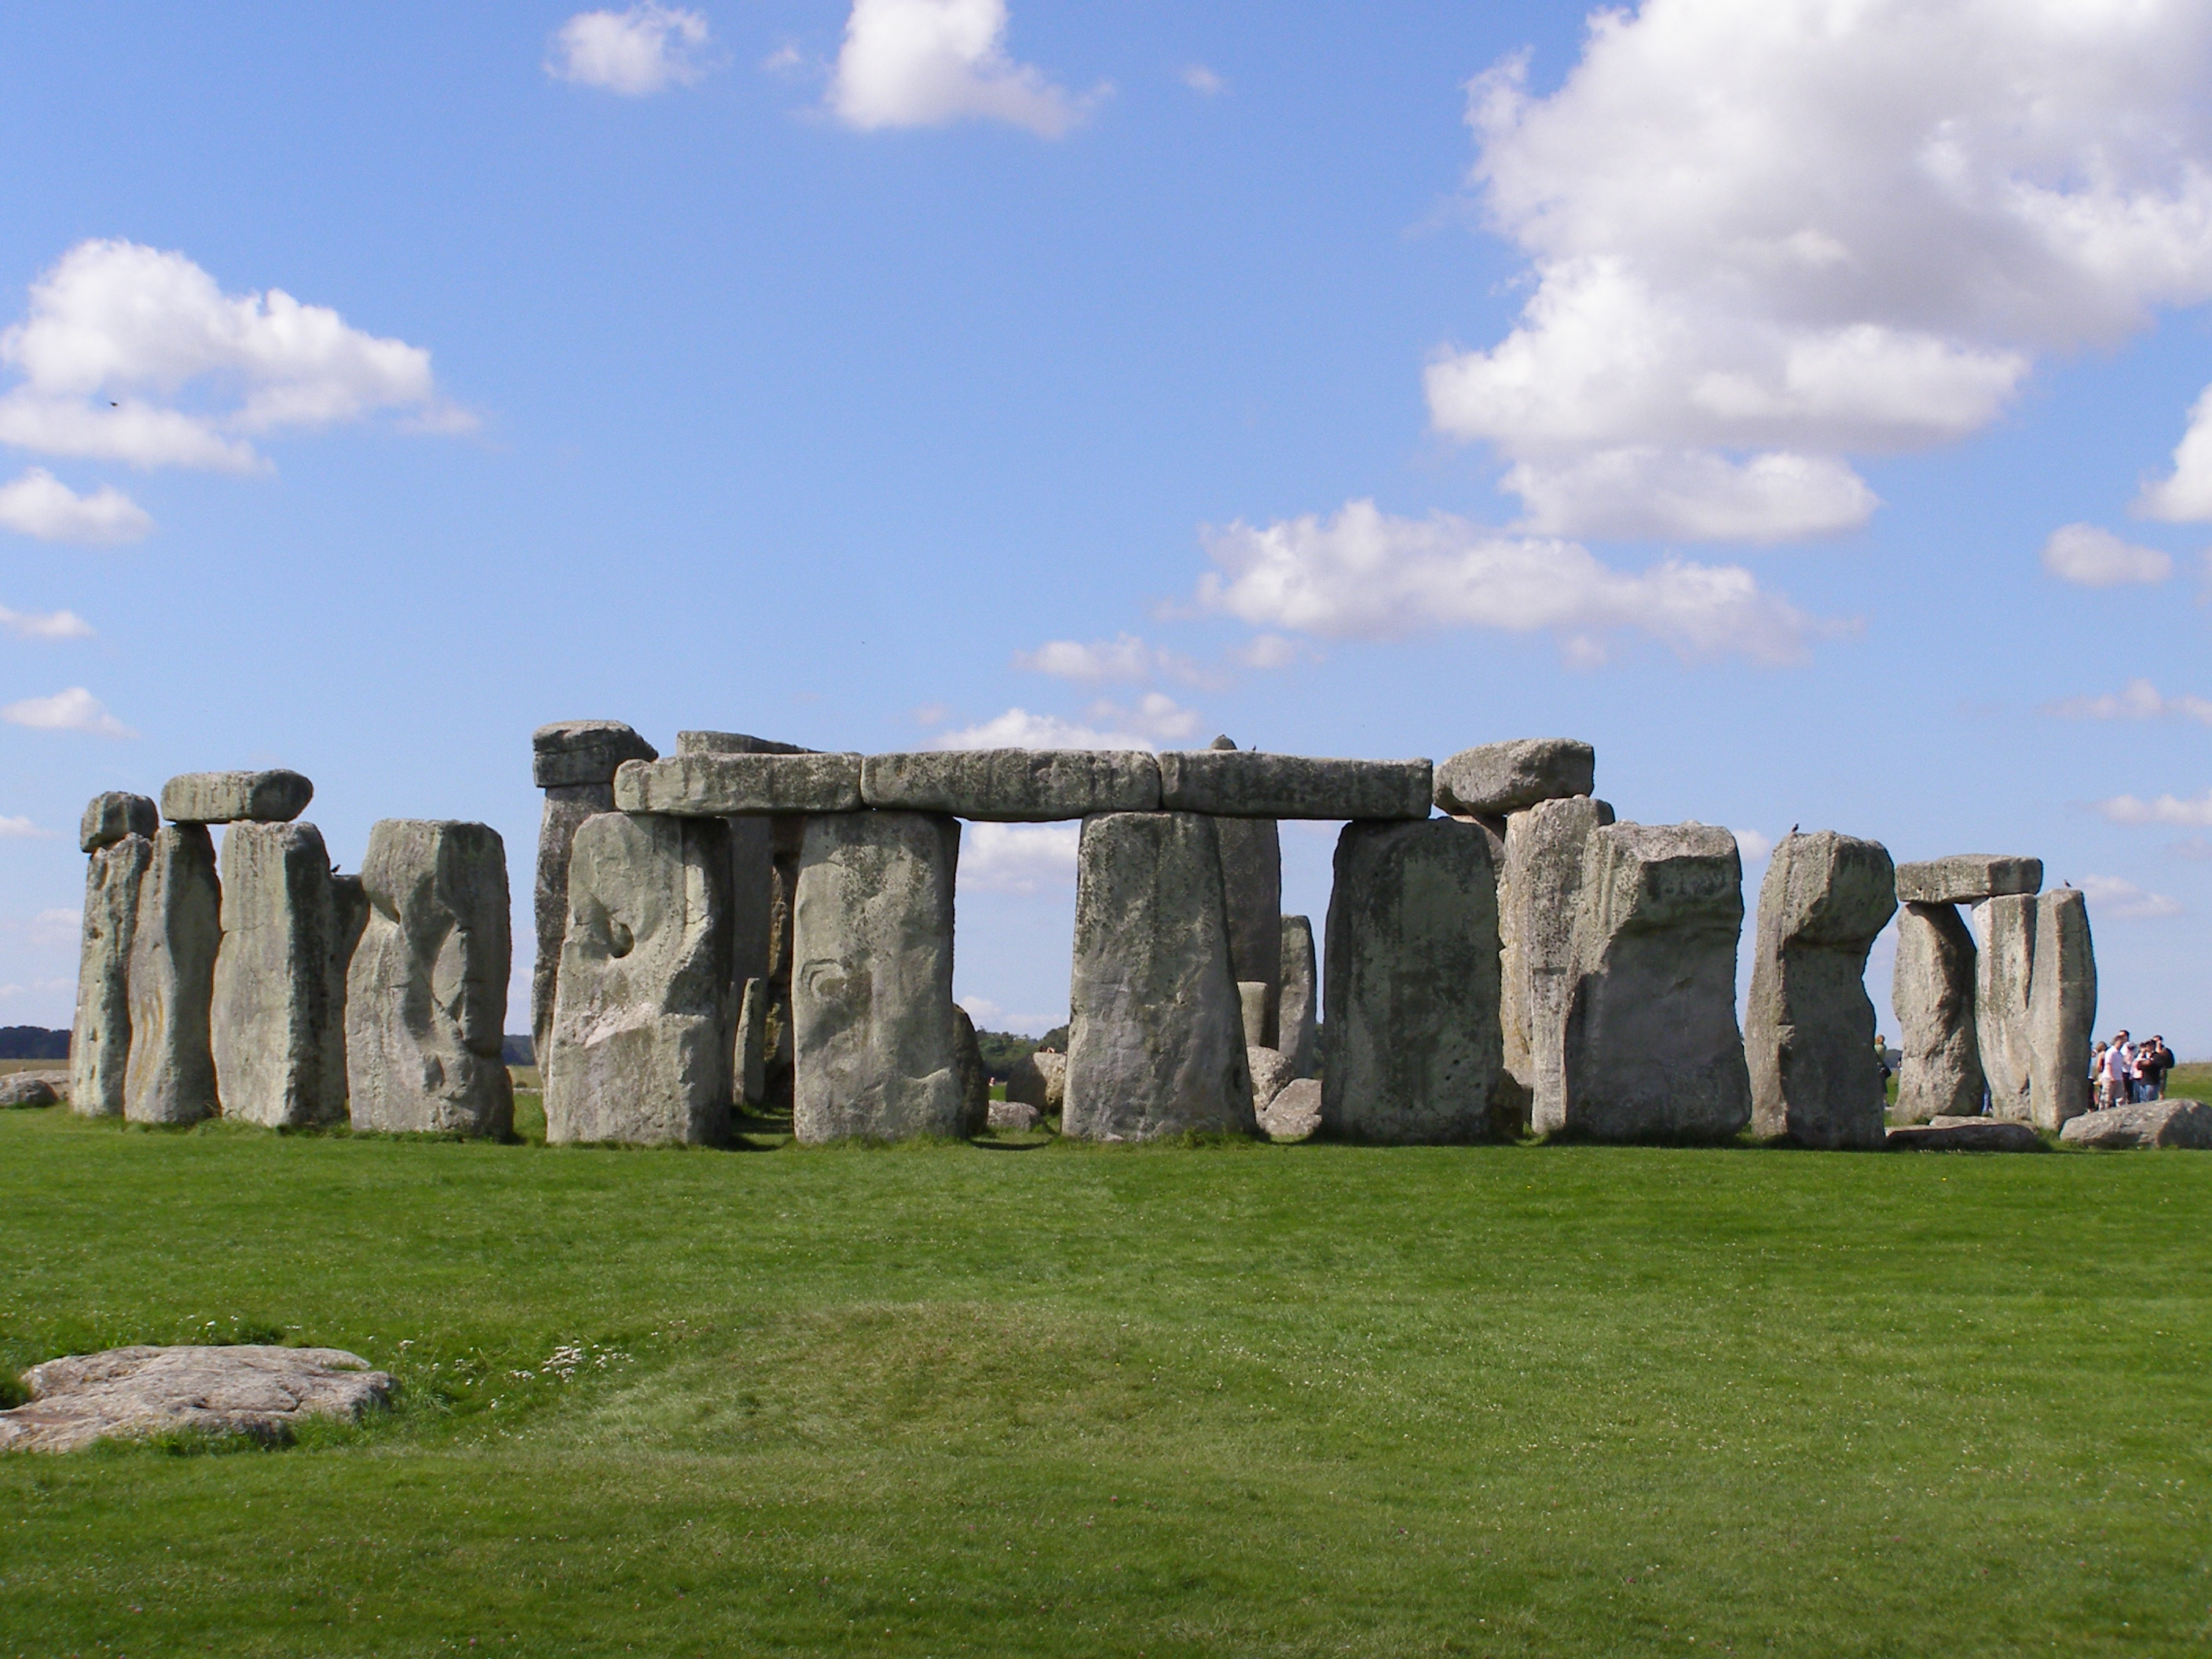 <p>Megalithic monument in England, built around 2500 BCE. Consists of large standing stones arranged in circular and horseshoe shapes. The purpose and methods of construction remain a mystery.</p>